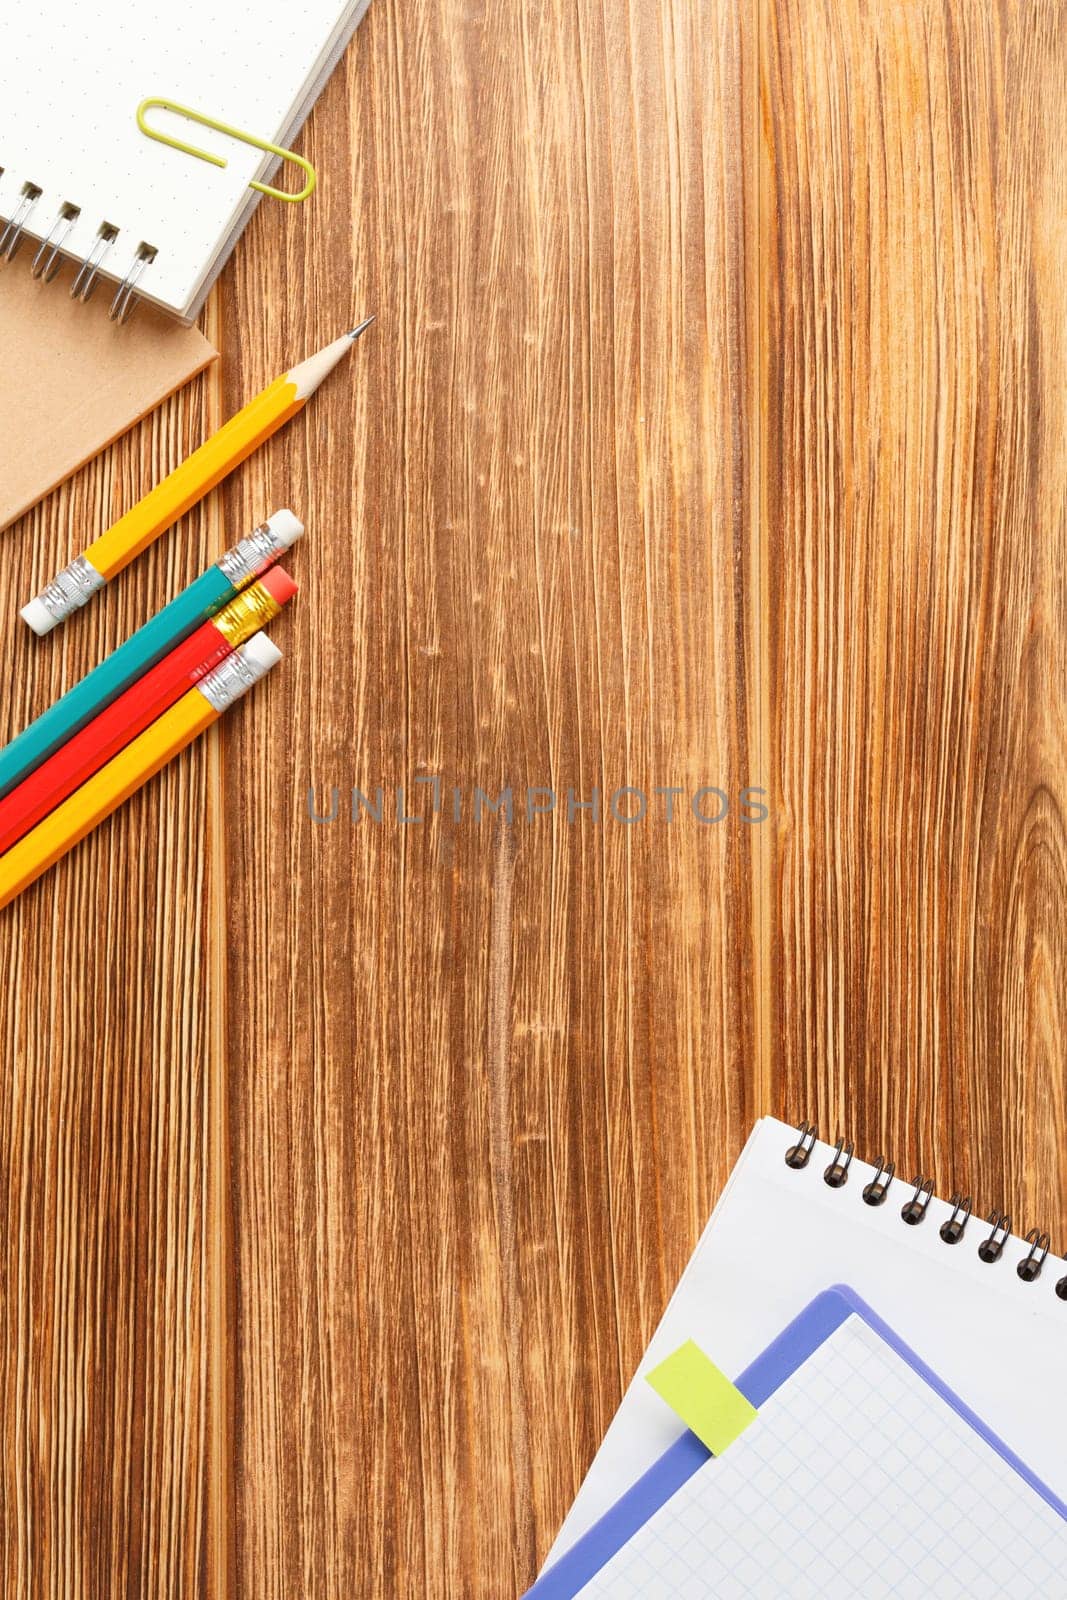 Open spiral notebook with a pencil on a wooden background. Study desk. Flat lay. Back to school concept. Top view.